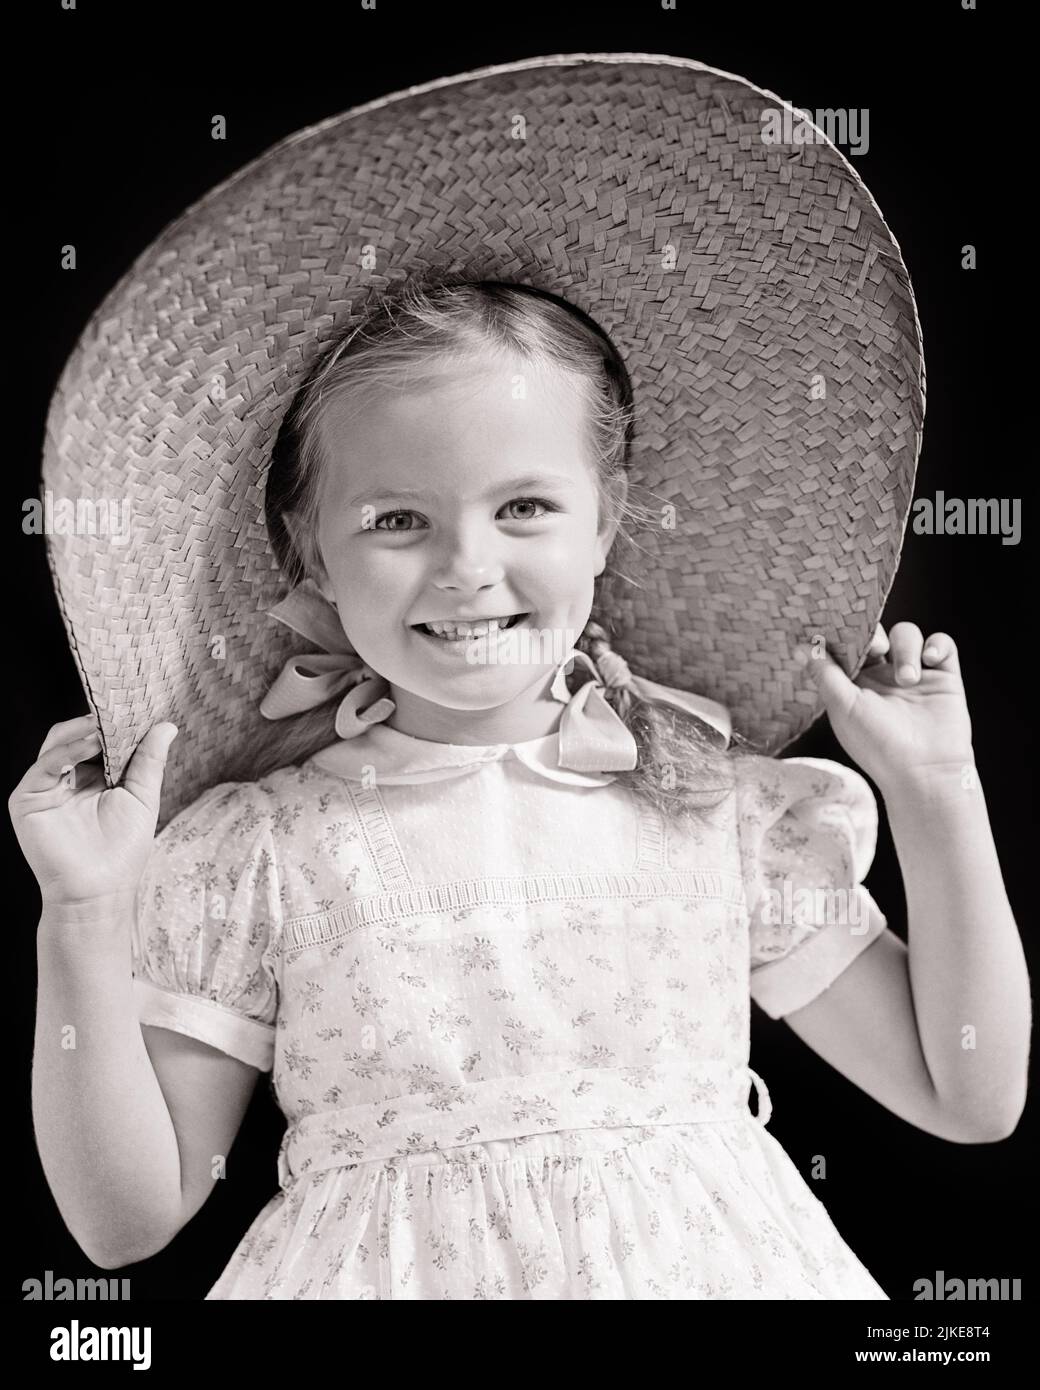 1940s SMILING PRETTY LITTLE GIRL WITH BRAIDS AND BOWS WEARING FLORAL PRINT DRESS HOLDING ON BIG STRAW HAT AND LOOKING AT CAMERA - j9996 HAR001 HARS COMMUNICATION PLEASED JOY LIFESTYLE FEMALES FLORAL STUDIO SHOT HEALTHINESS HOME LIFE COPY SPACE HALF-LENGTH CONFIDENCE EXPRESSIONS B&W SUMMERTIME PRETTY SUNSHINE HAPPINESS CHEERFUL AND EXCITEMENT PRIDE SMILES BOWS JOYFUL STYLISH BRAIDS CHARMING JUVENILES BLACK AND WHITE CAUCASIAN ETHNICITY HAR001 OLD FASHIONED Stock Photo